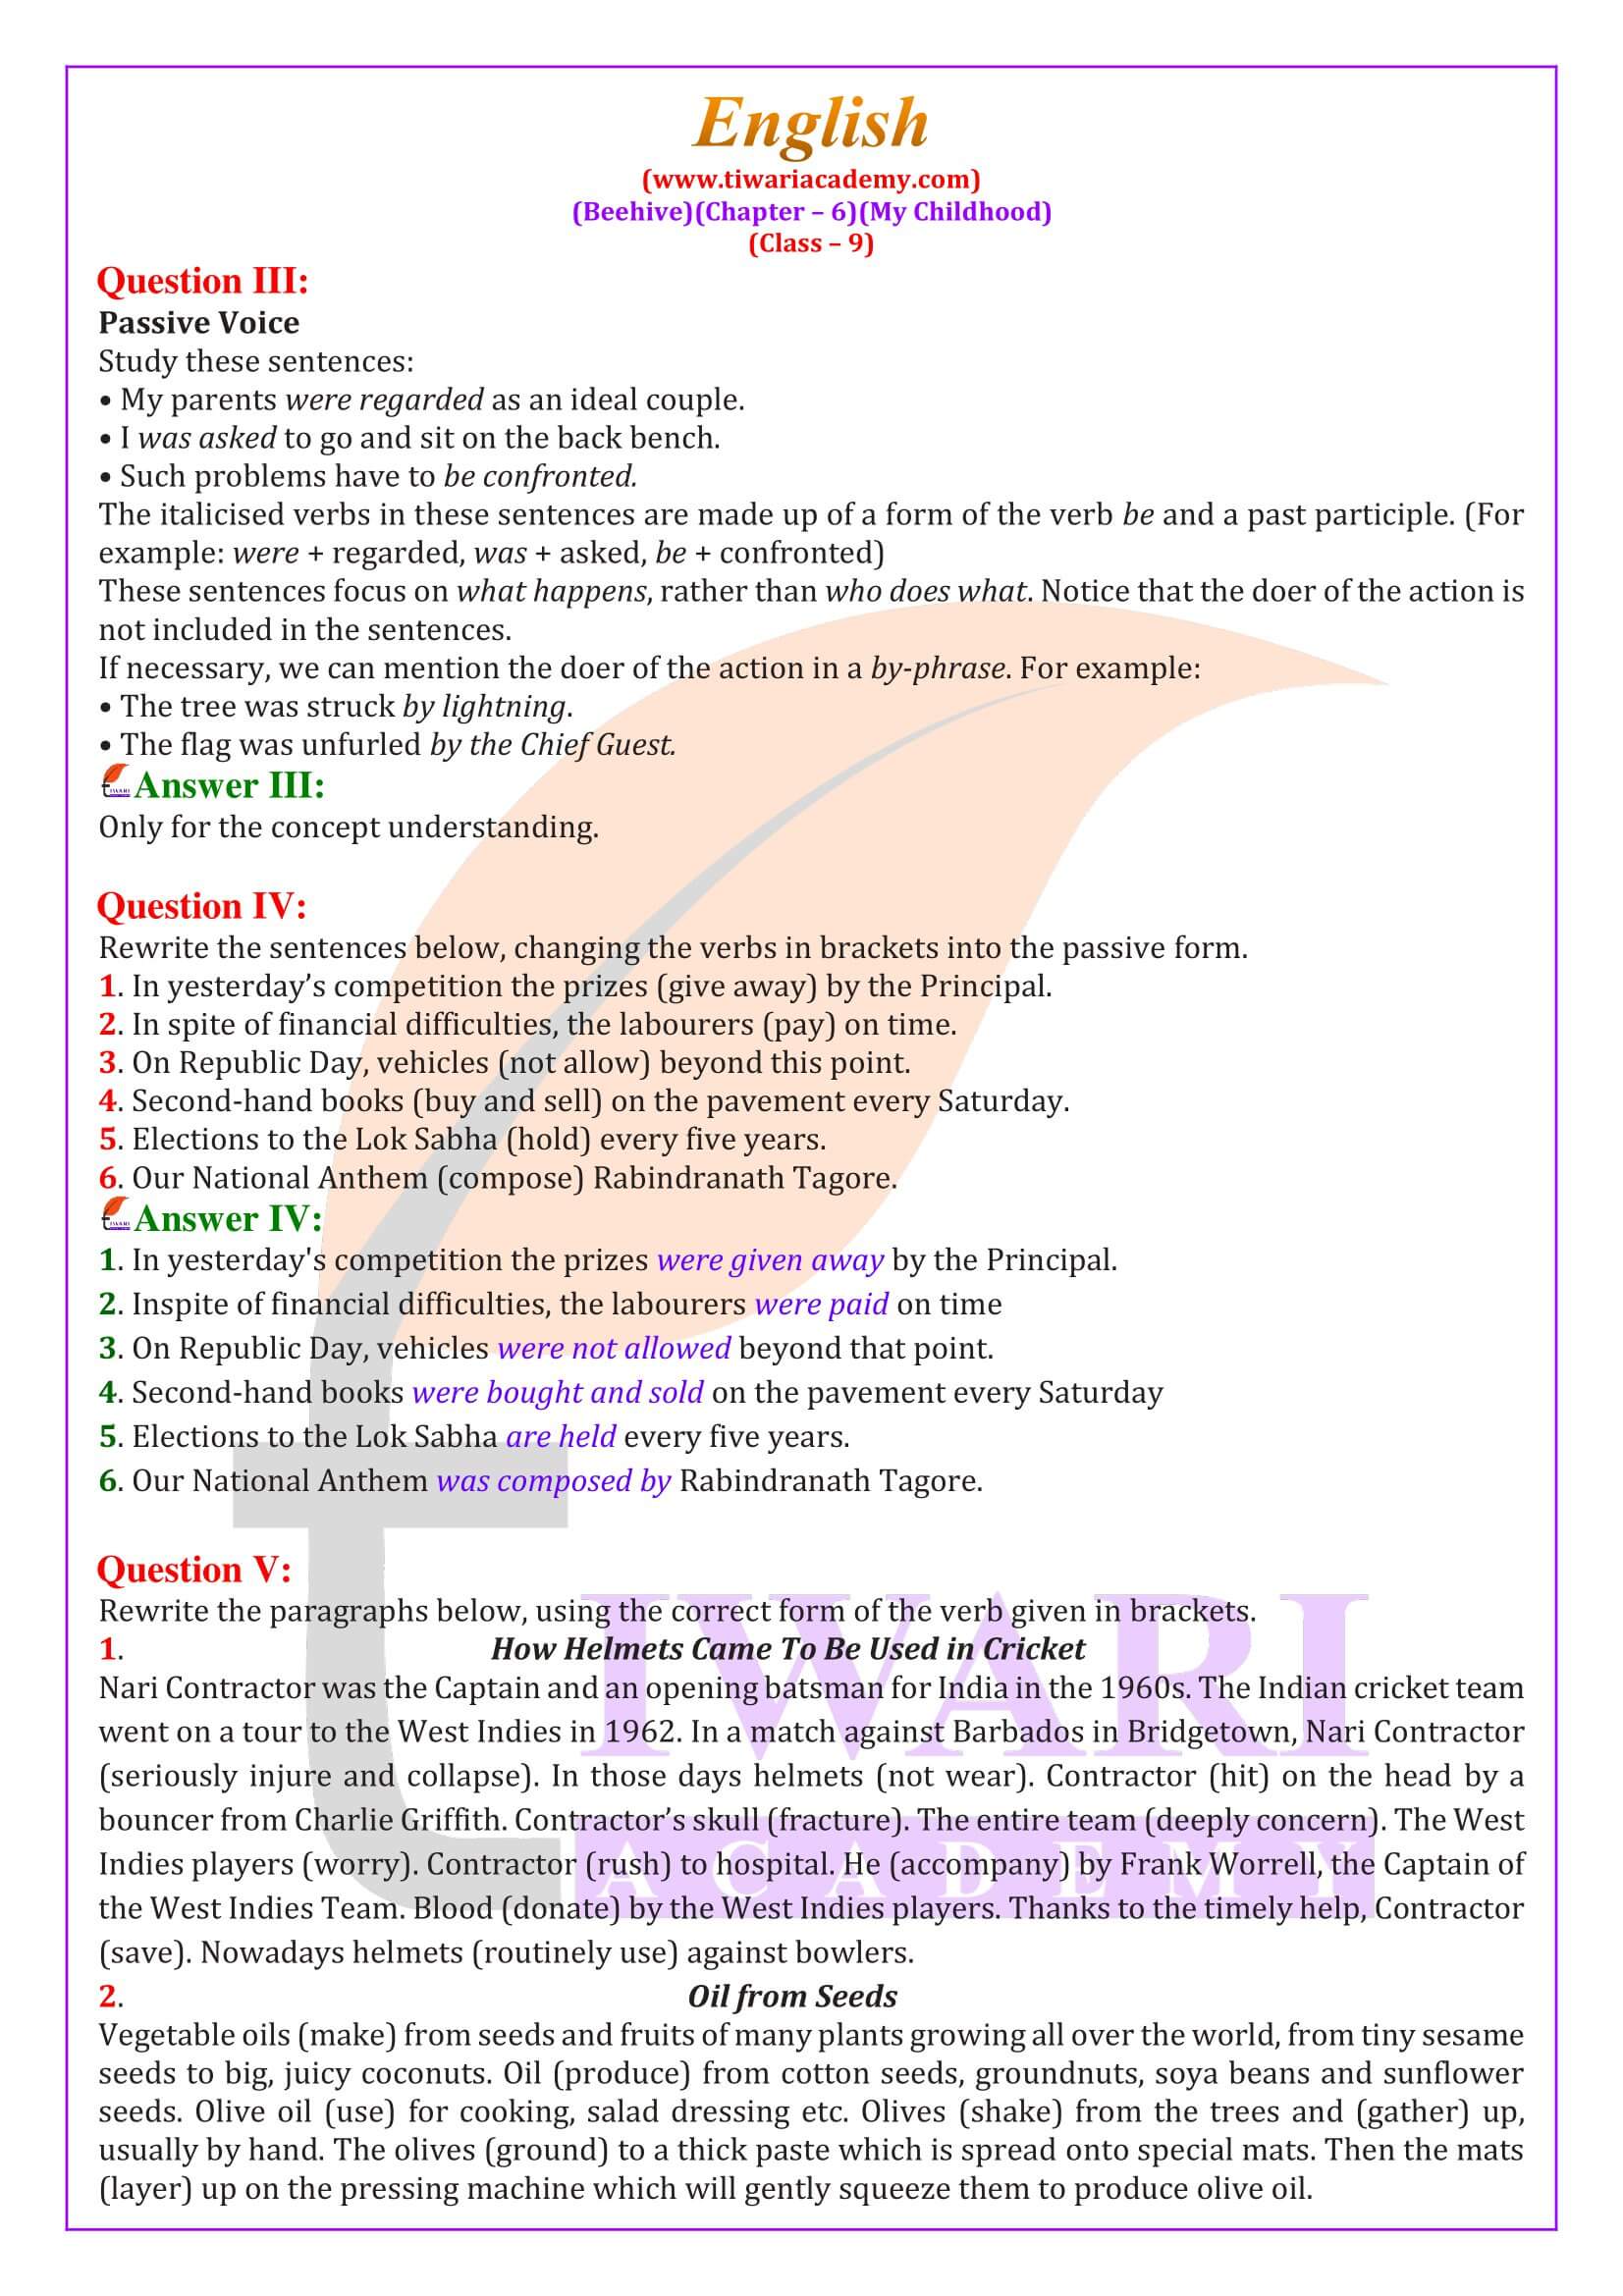 Class 9 English Beehive Chapter 6 Guide